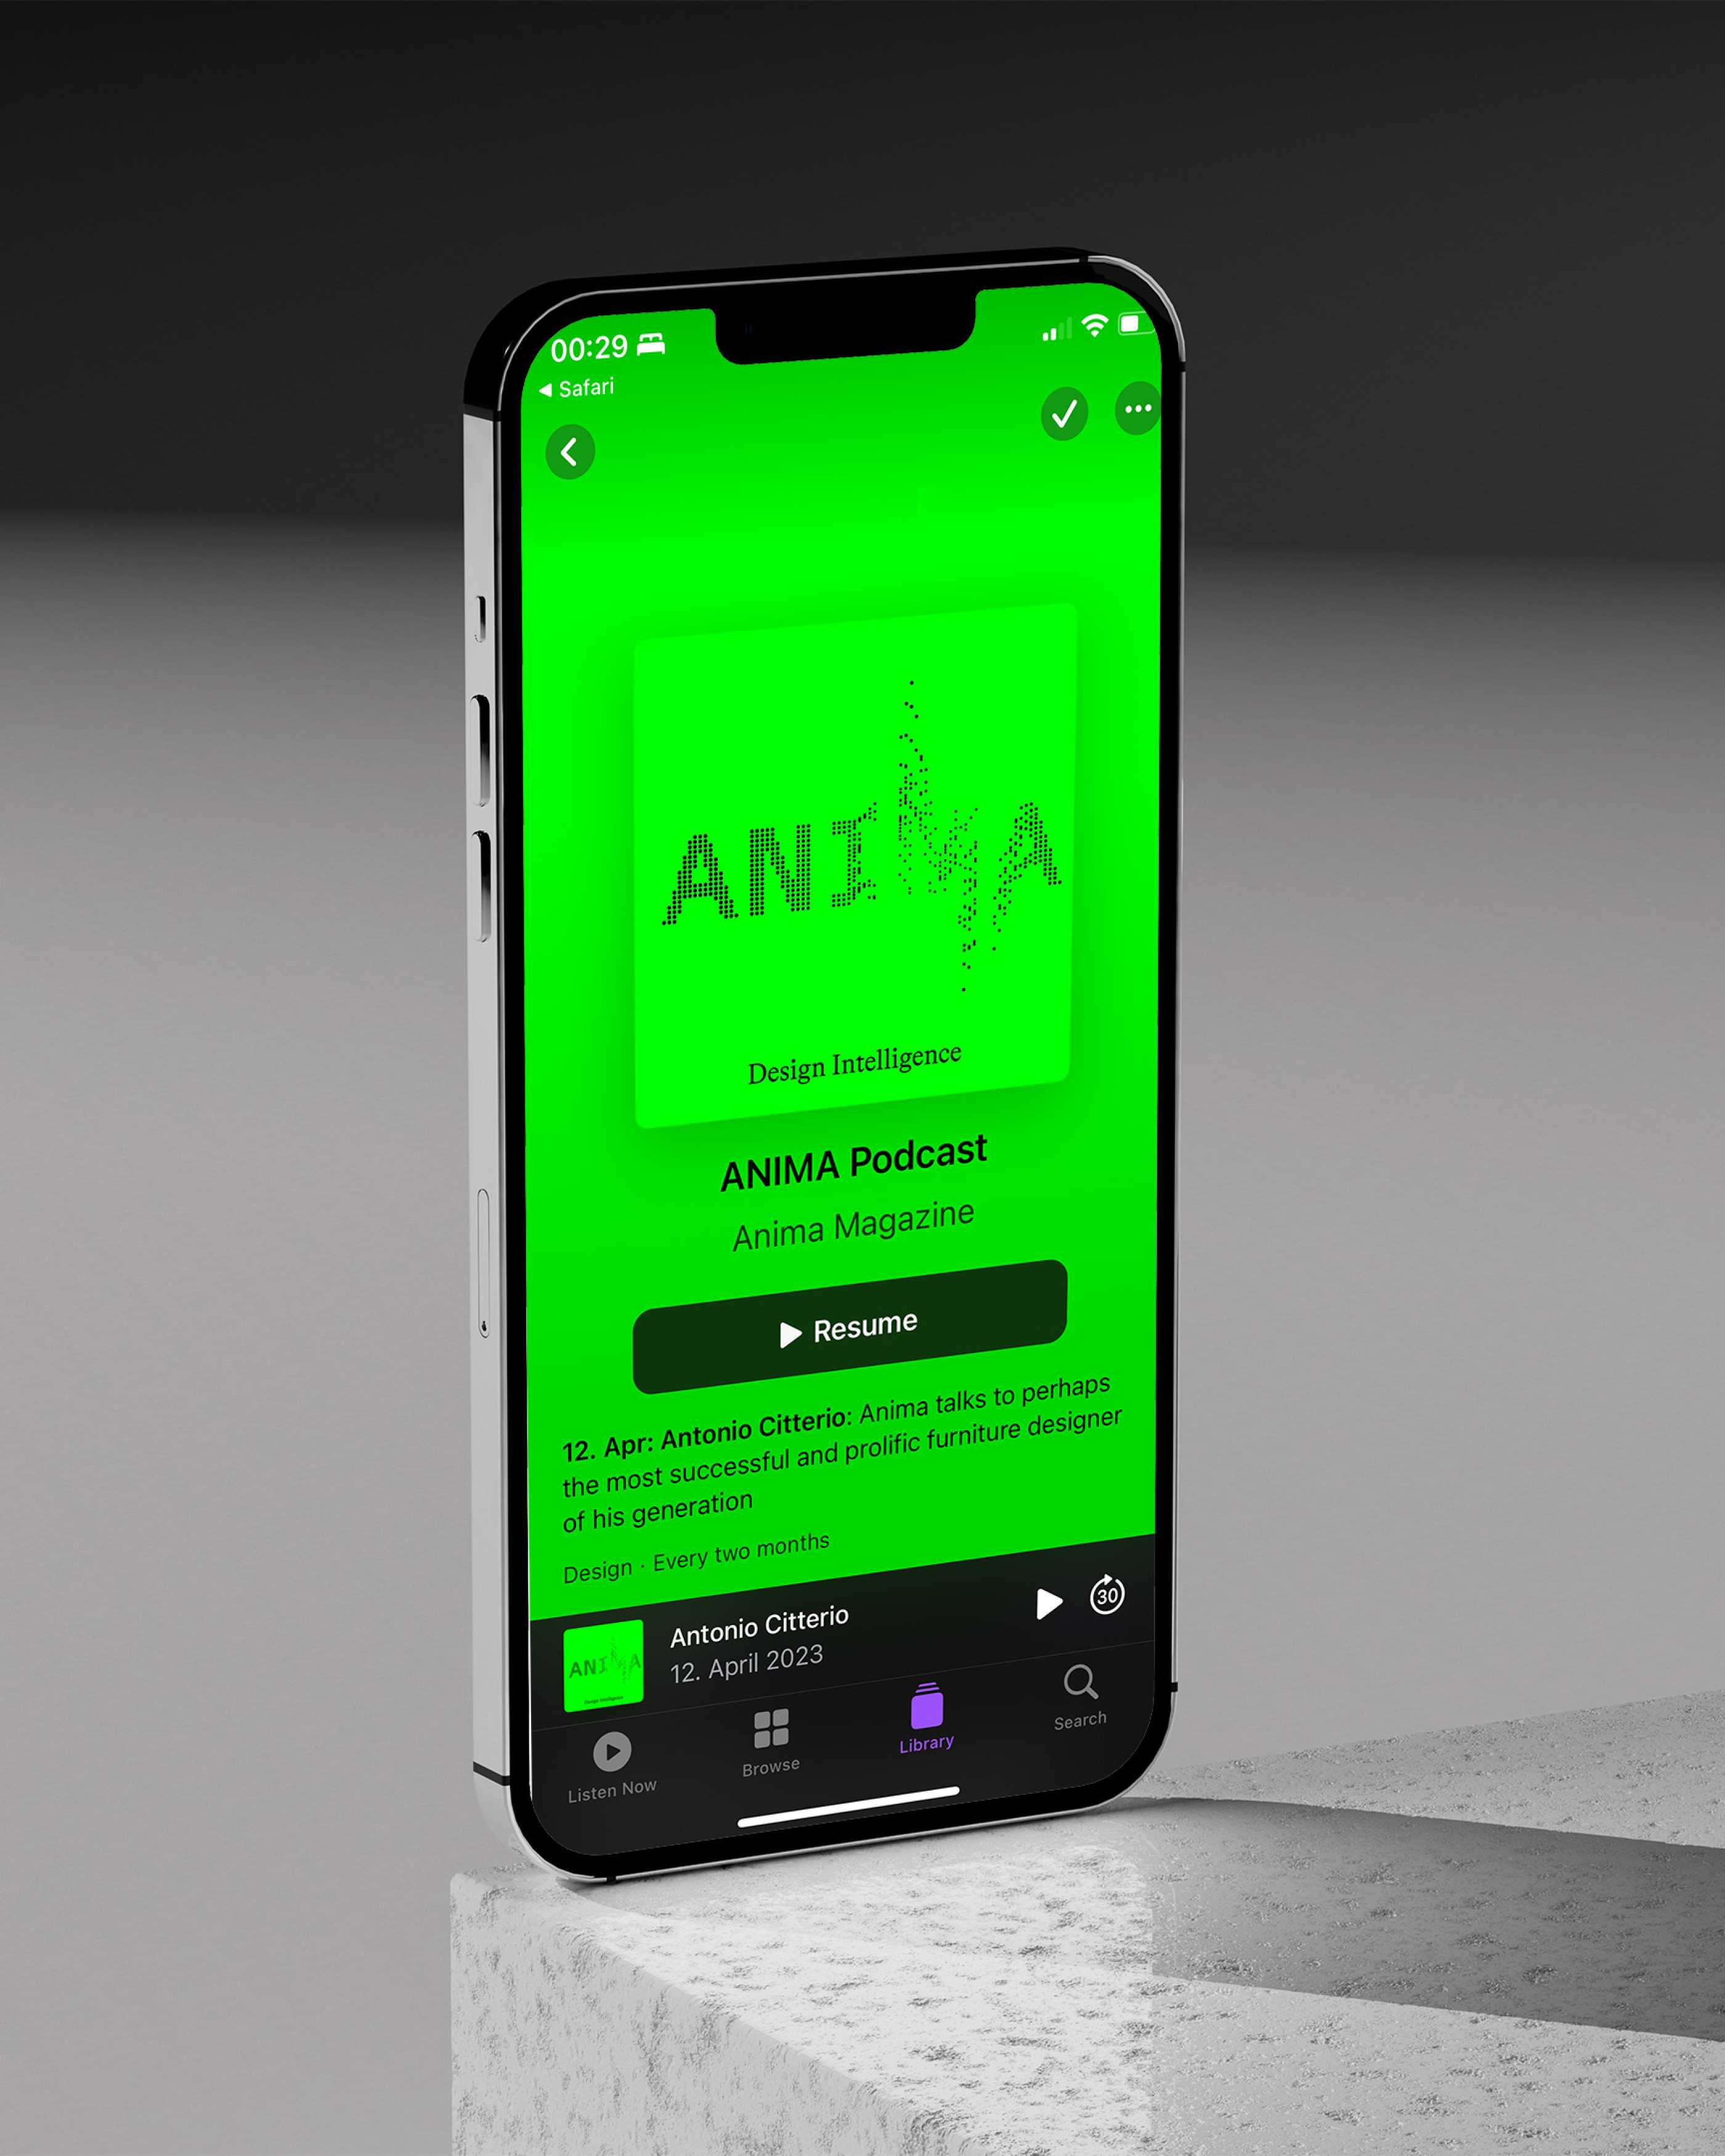 Anima Podcast cover displayed on a smartphone.